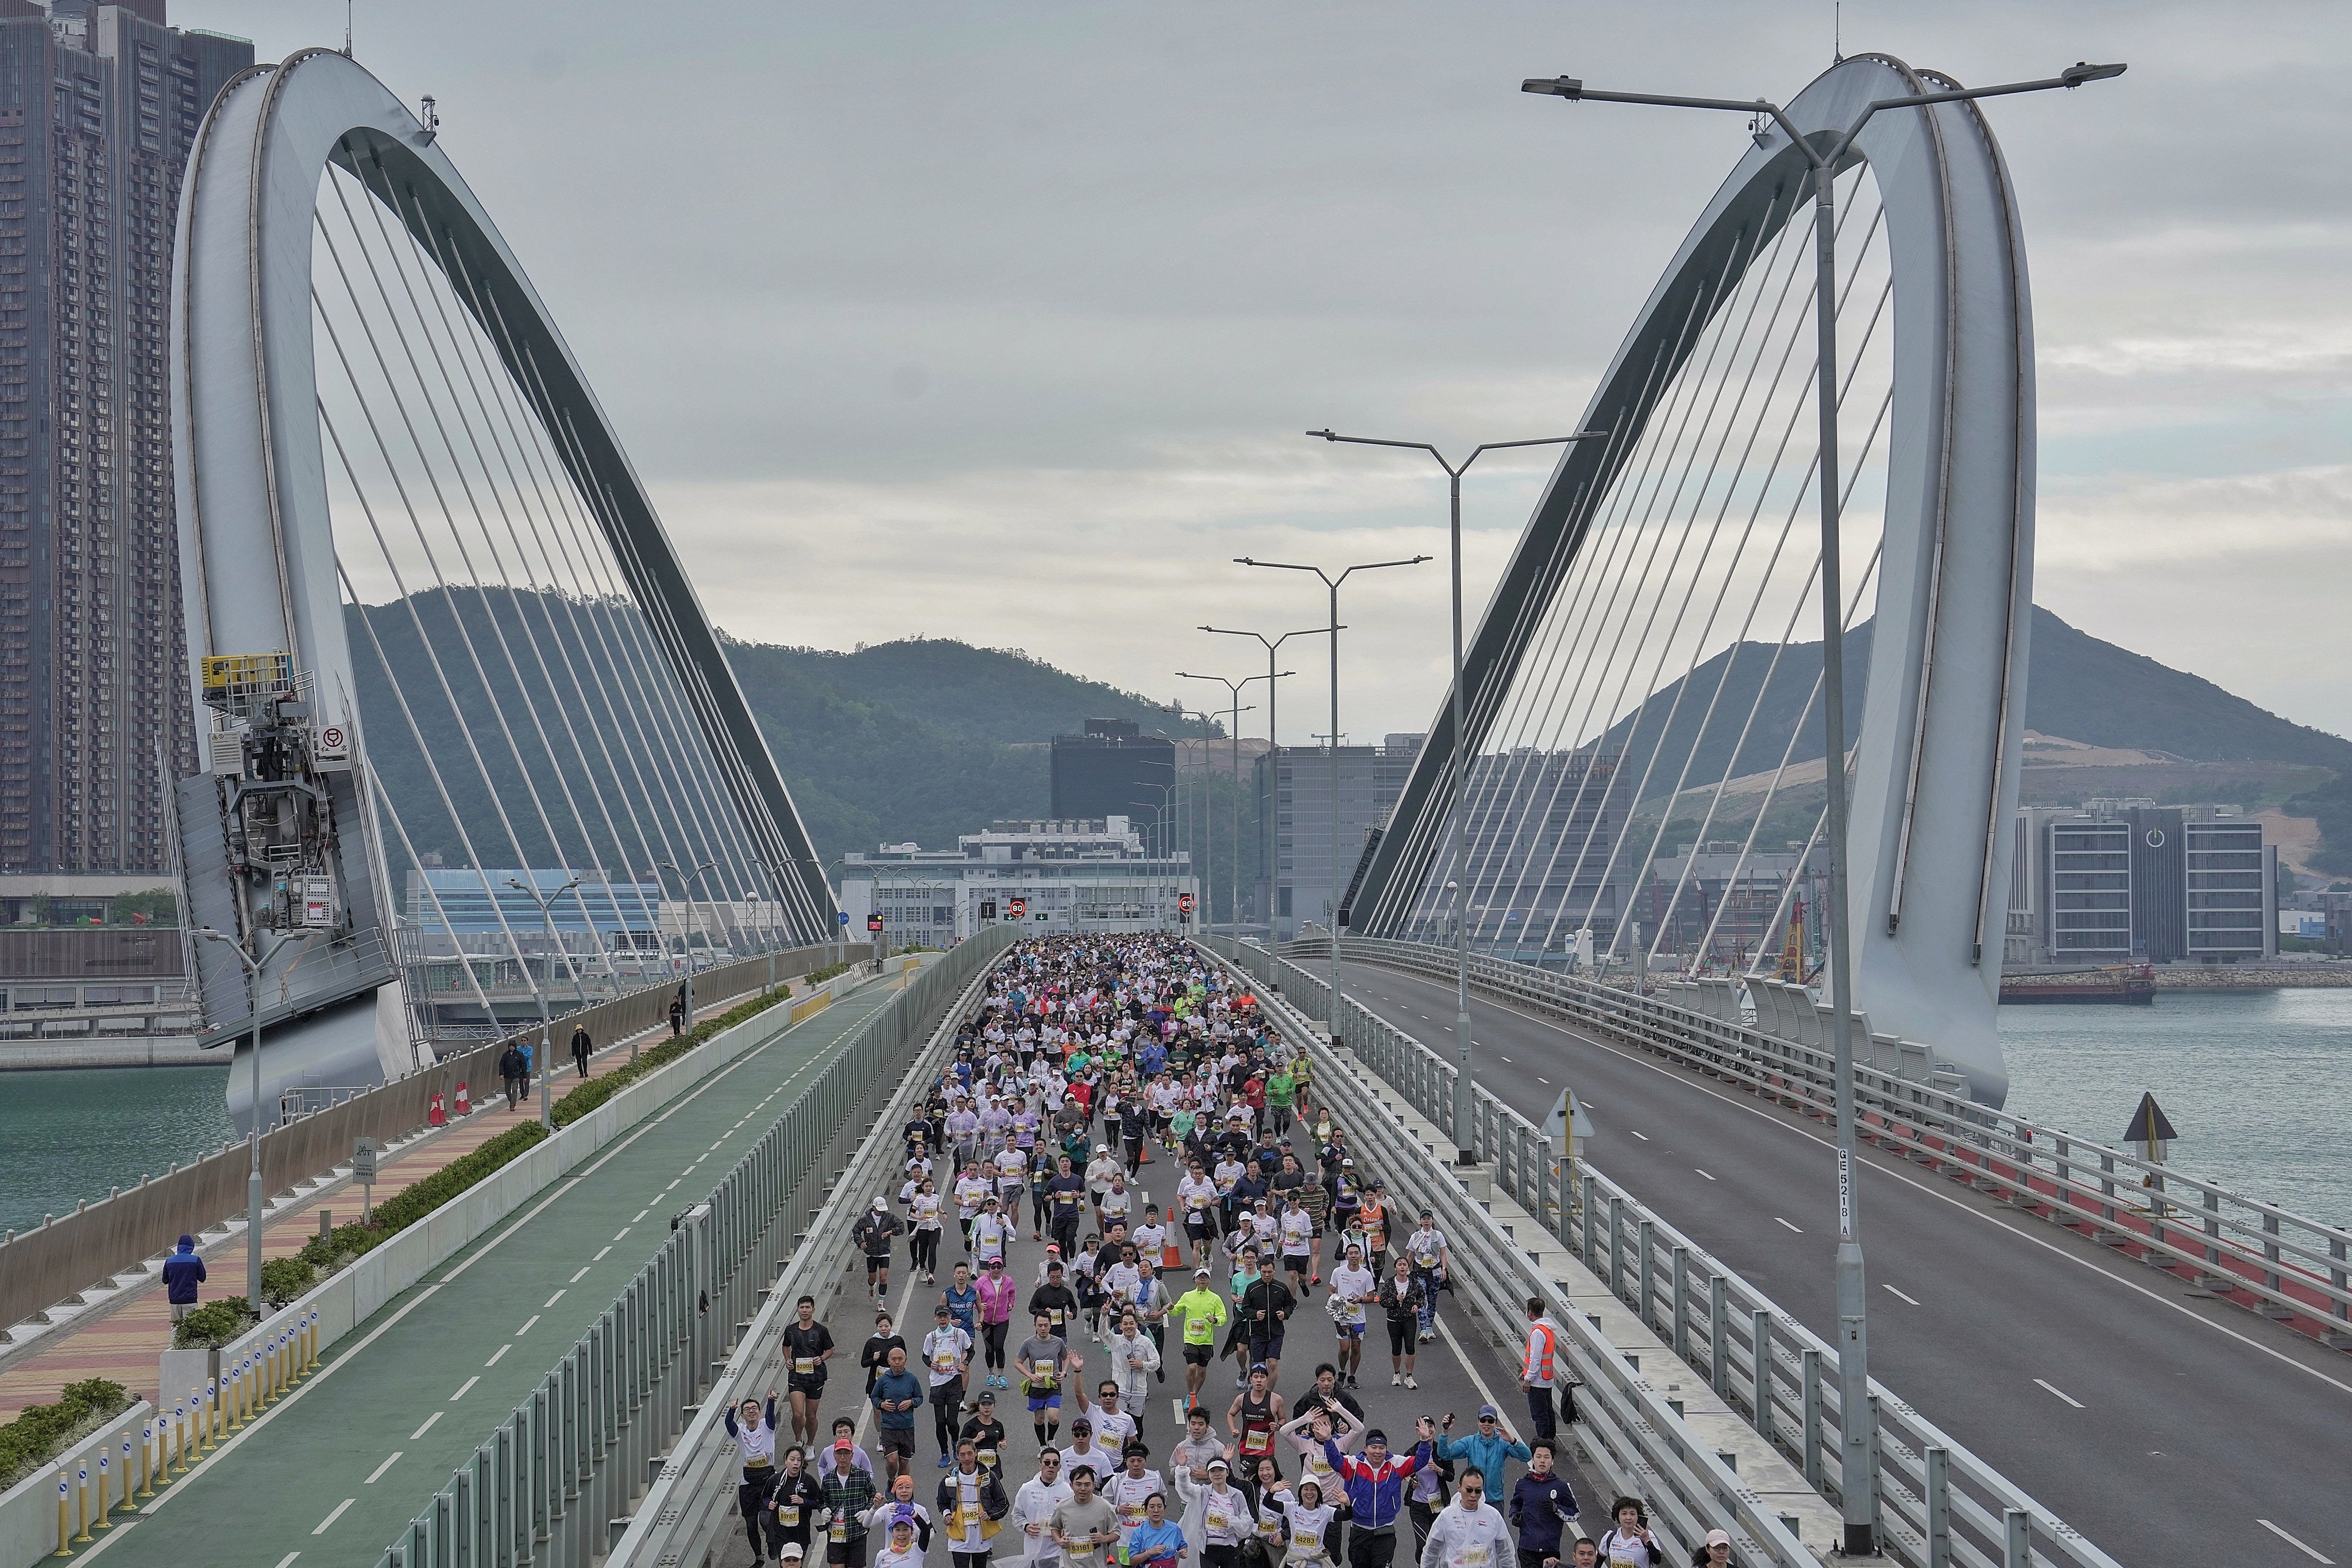 The 10km Streetathon on part of the Cross Bay Link on December 17. This is the only bridge in Hong Kong that has a footpath and cycle track. Photo: Elson LI